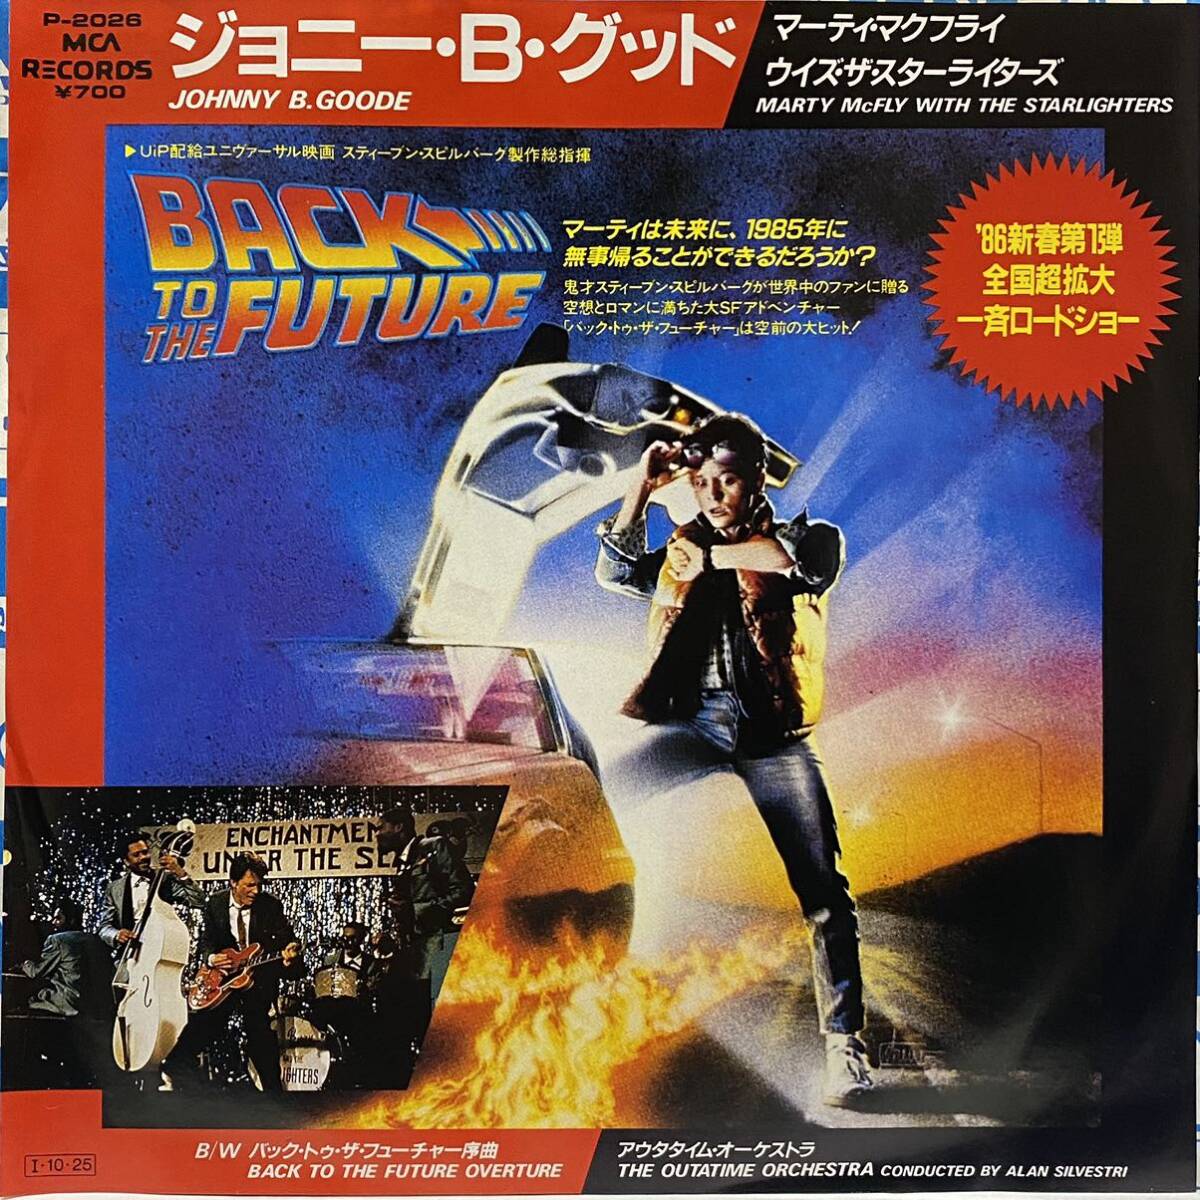 Marty McFly With The Starlighters Johnny B. Goode バック トゥ ザ フューチャー BACK TO THE FUTURE 7inch 7インチ EP 国内盤 見本盤の画像1